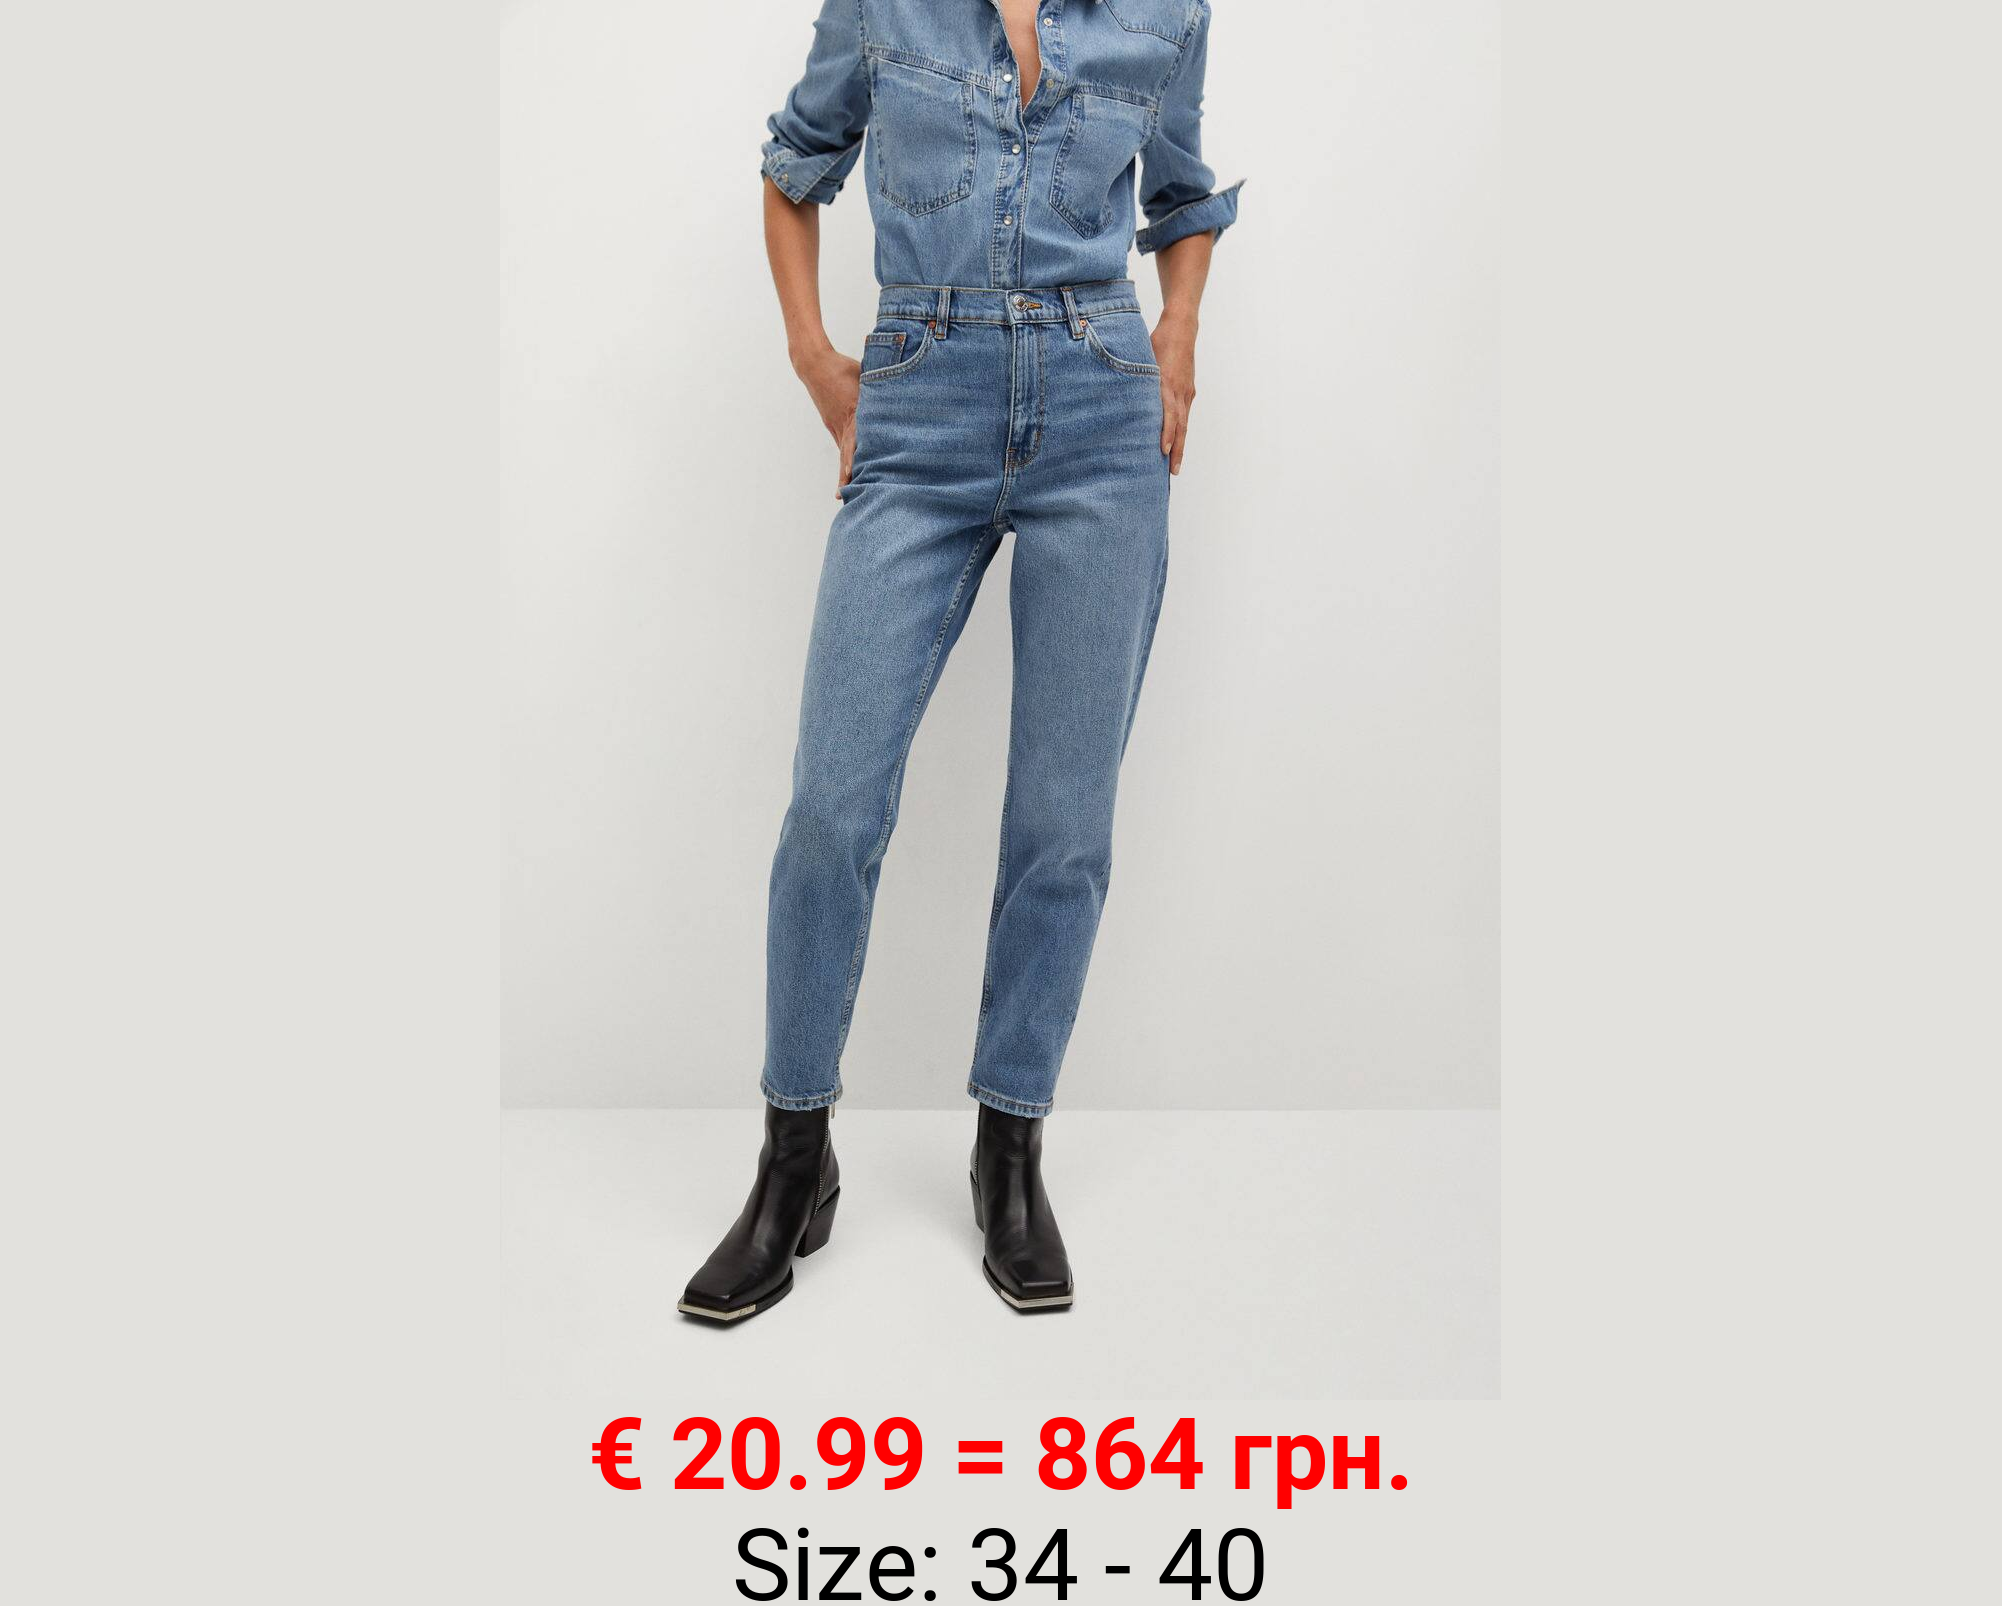 Jeans mom-fit